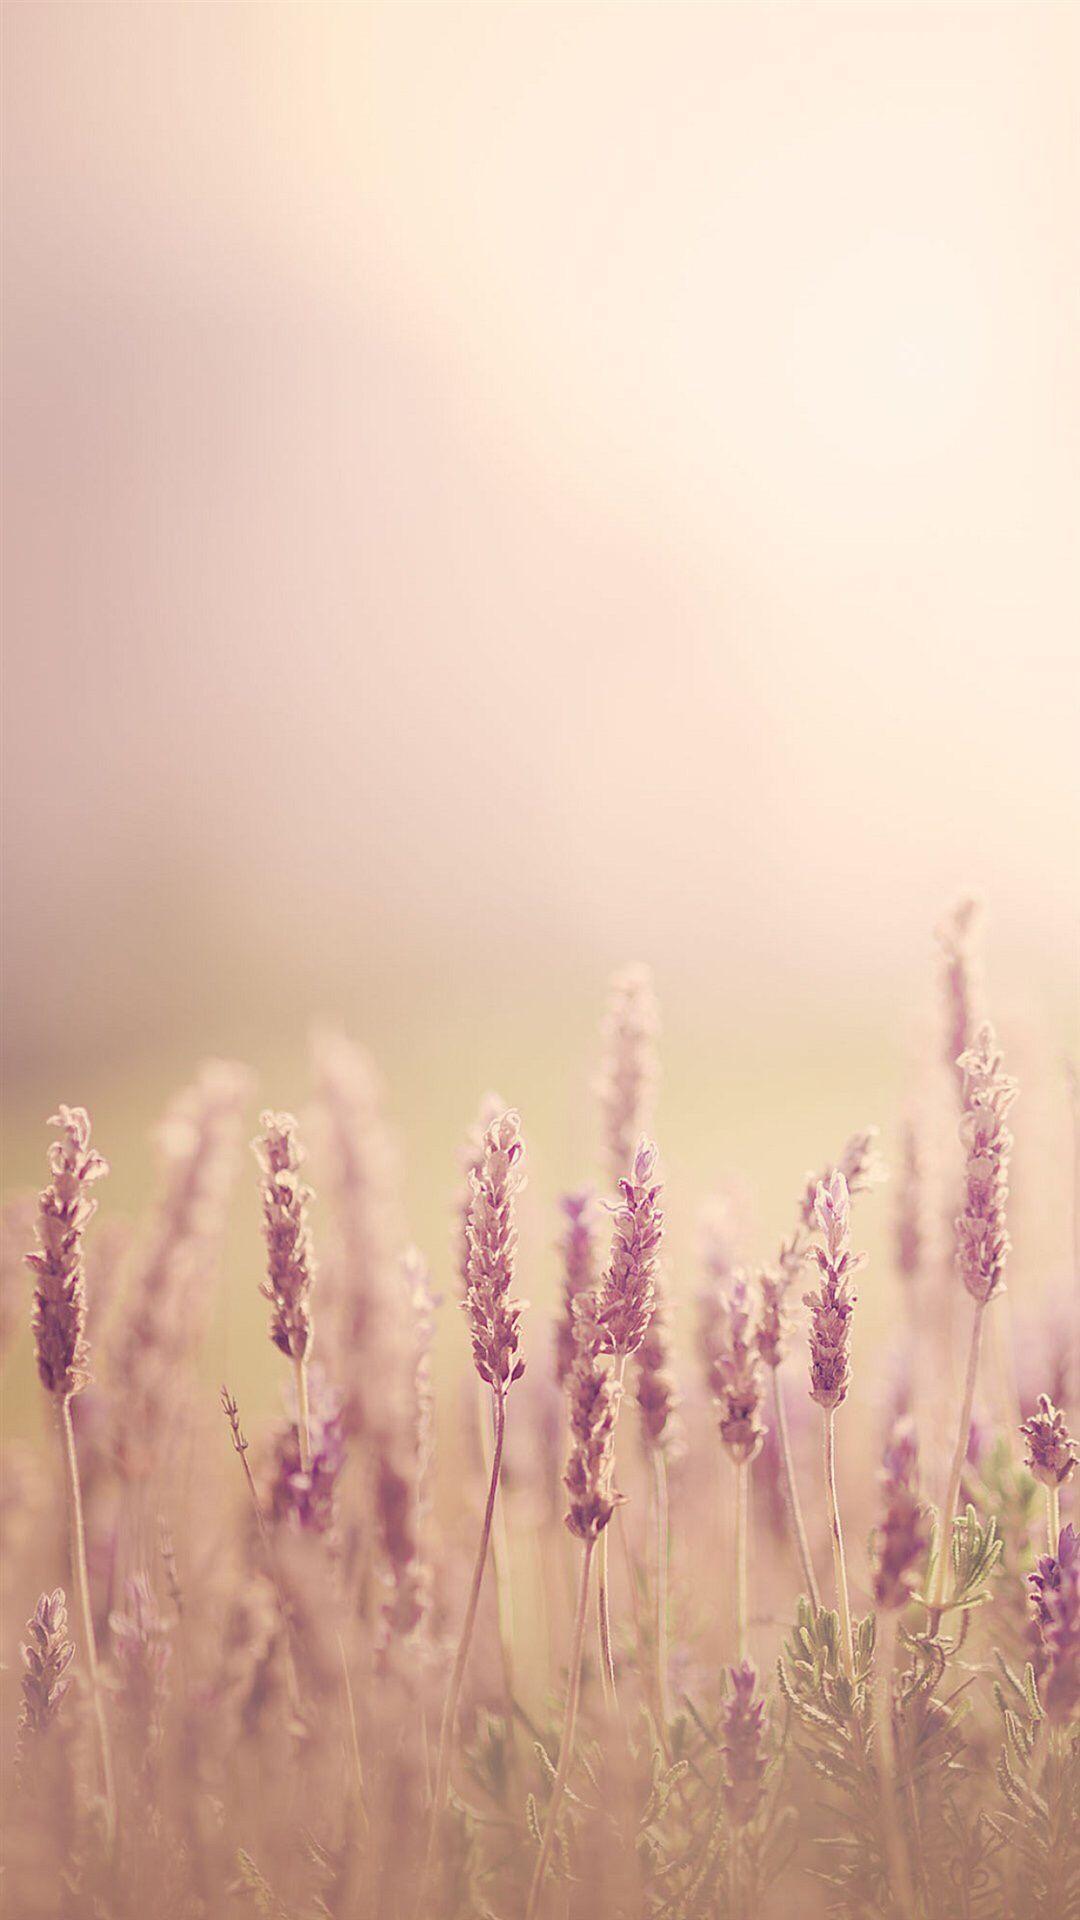 Pure Blurry Land Bokeh #iPhone #wallpaper. Forest wallpaper iphone, Flower wallpaper, Pretty wallpaper iphone